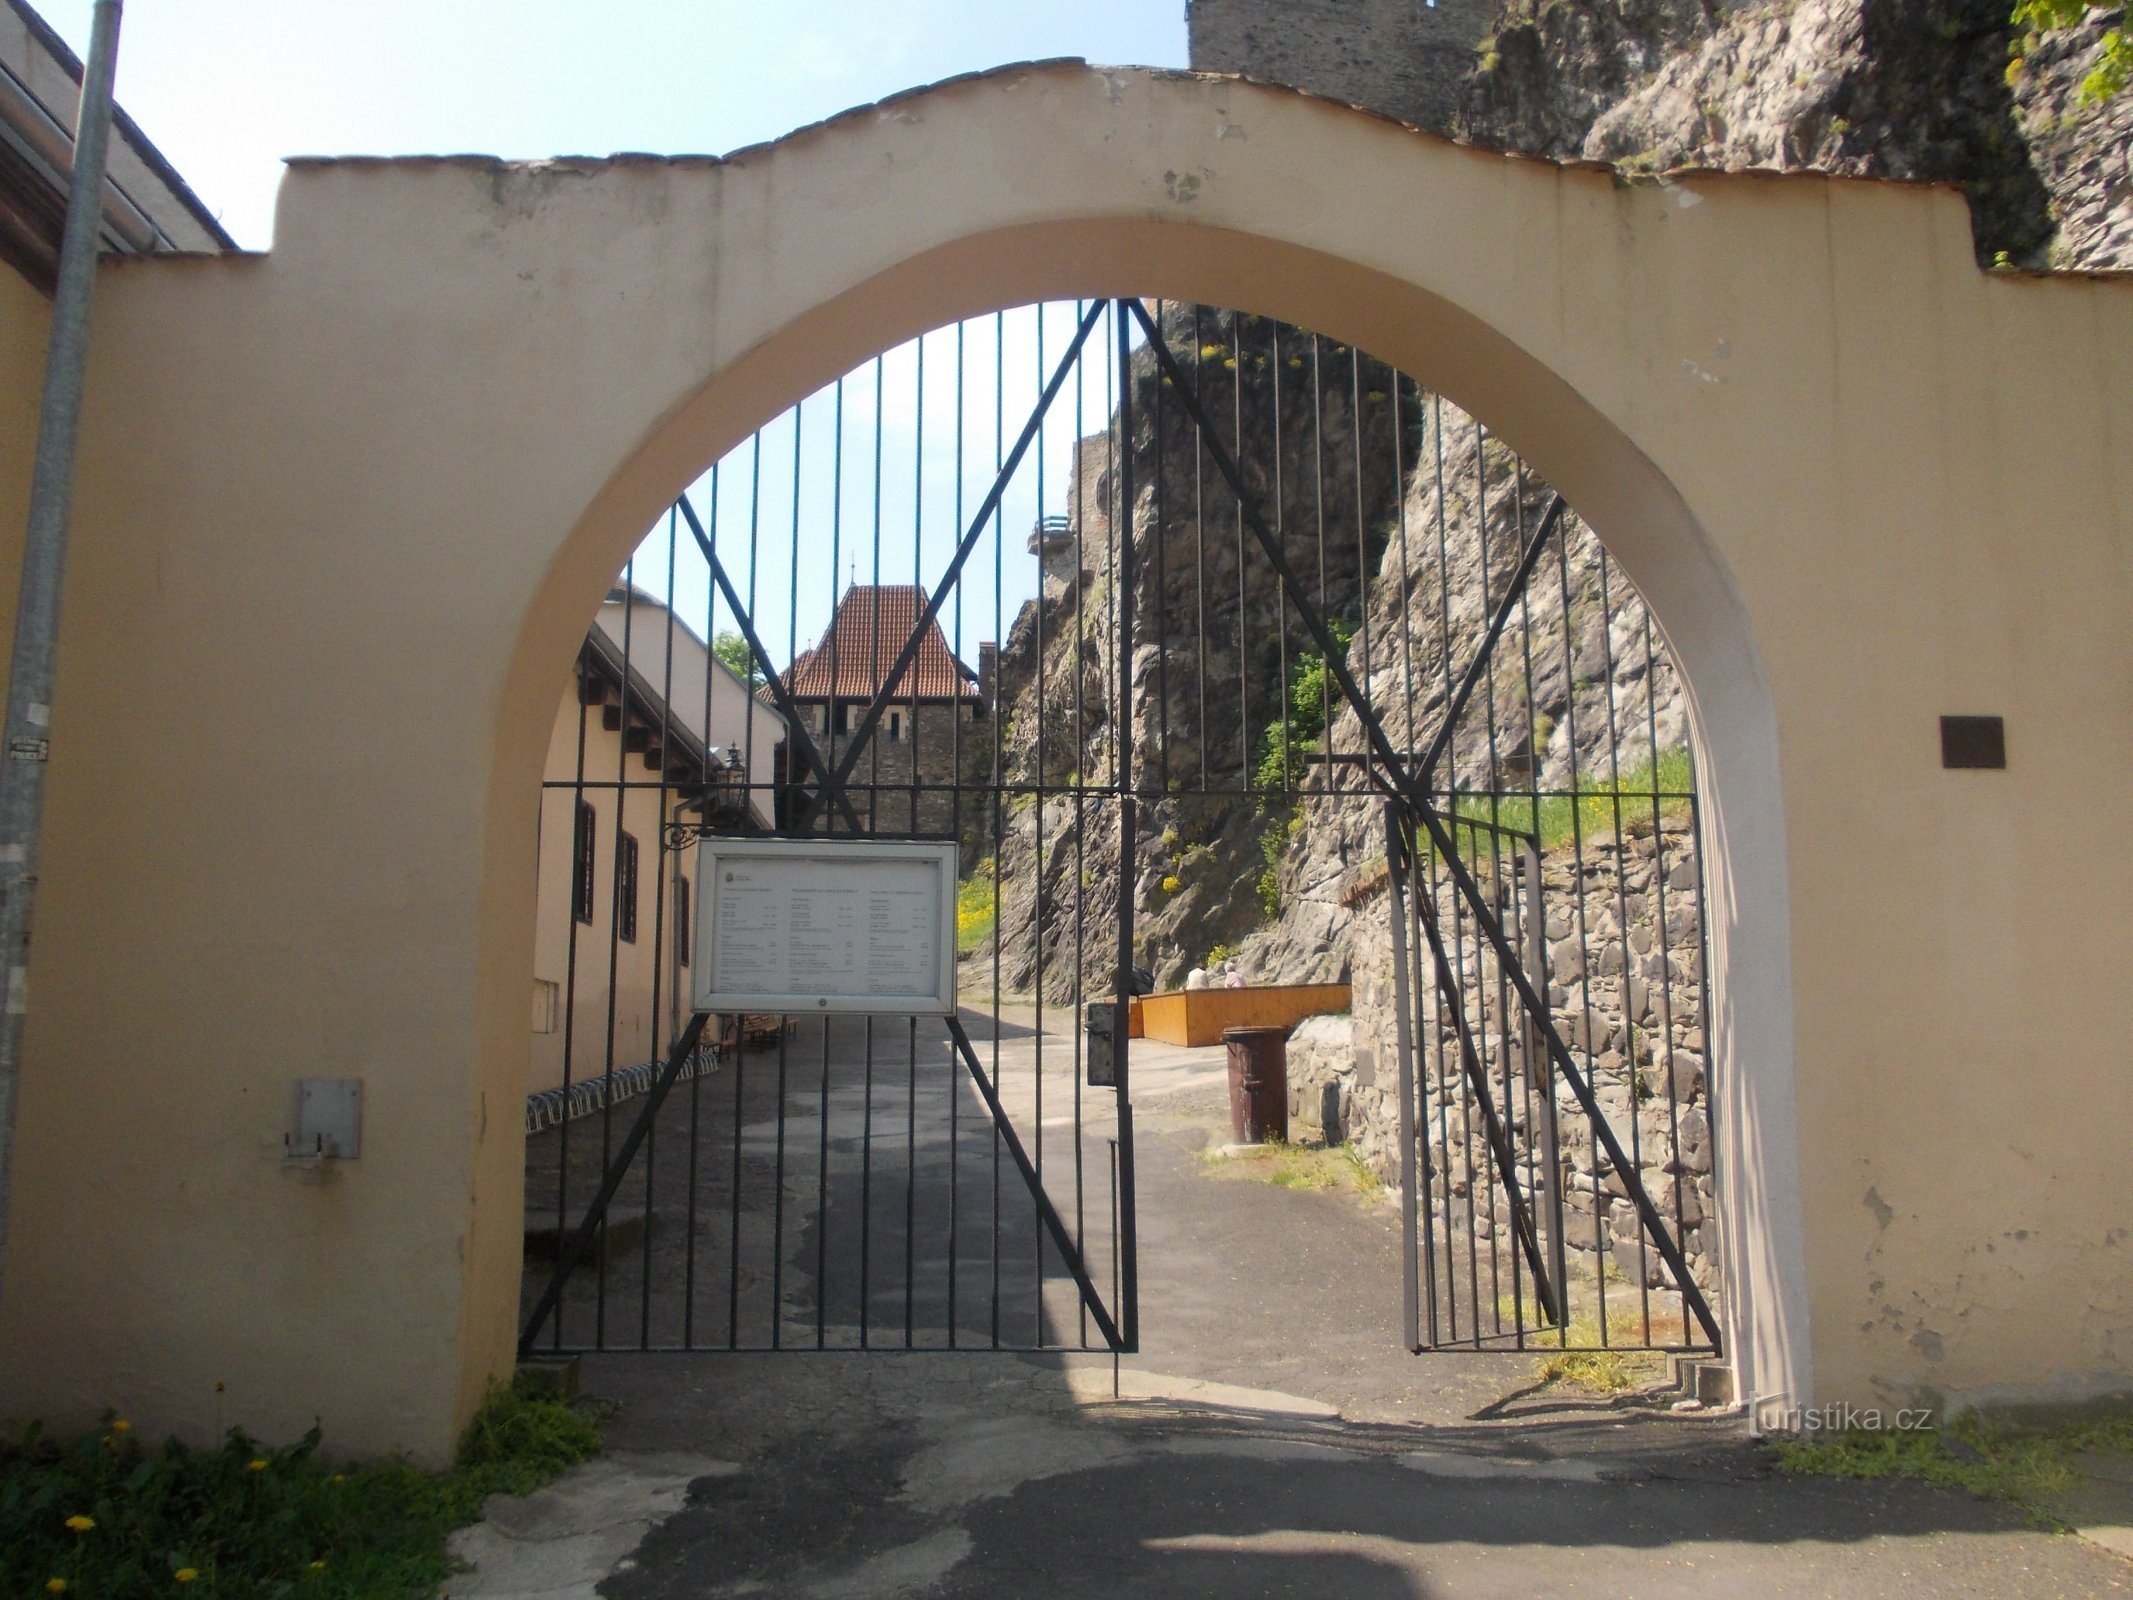 gate to the castle grounds